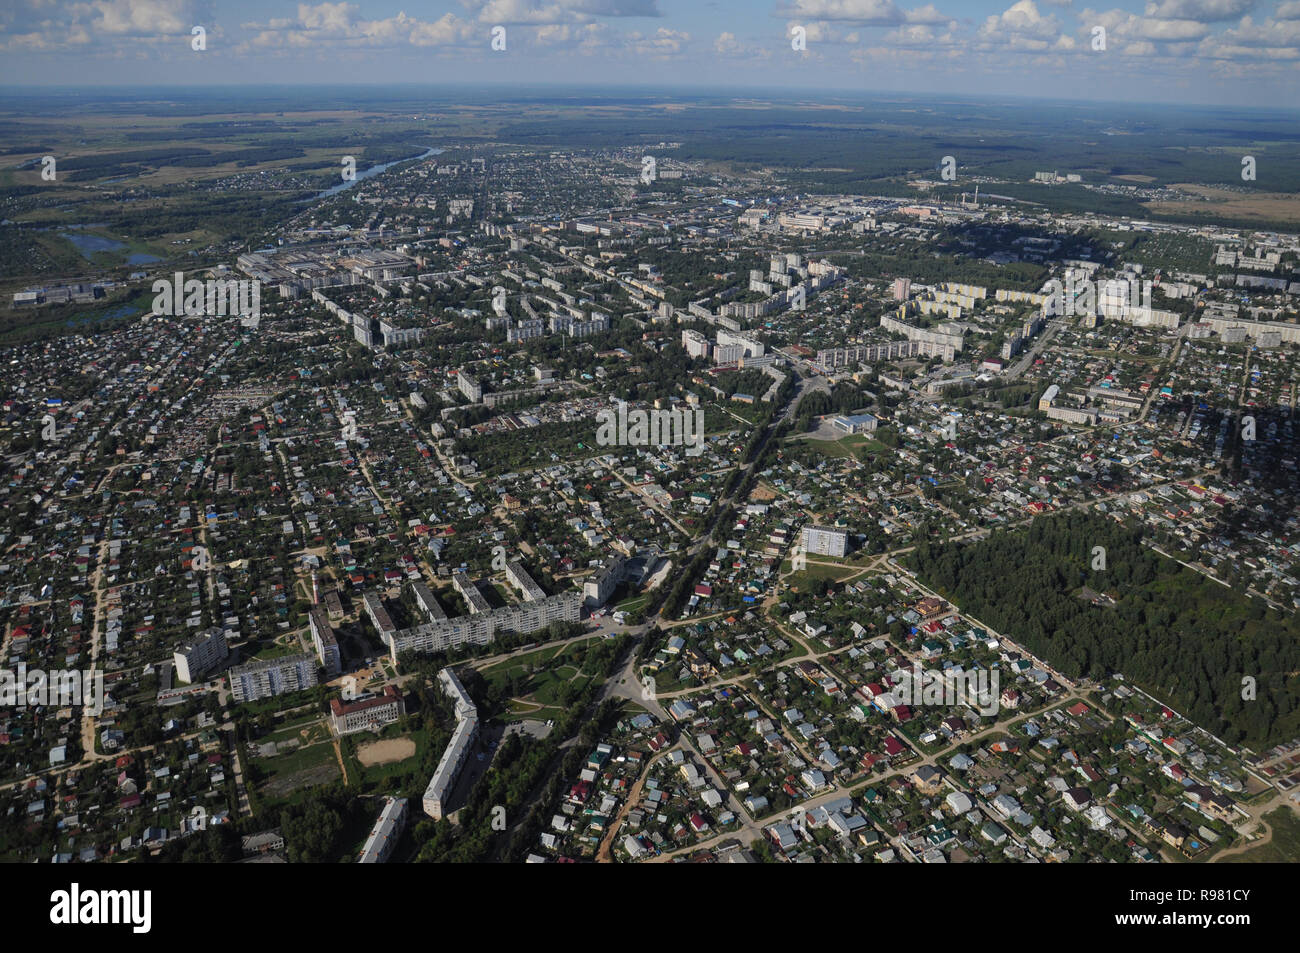 Kovrov, Russia. 17 August 2013. Kovrov town from the air Stock Photo